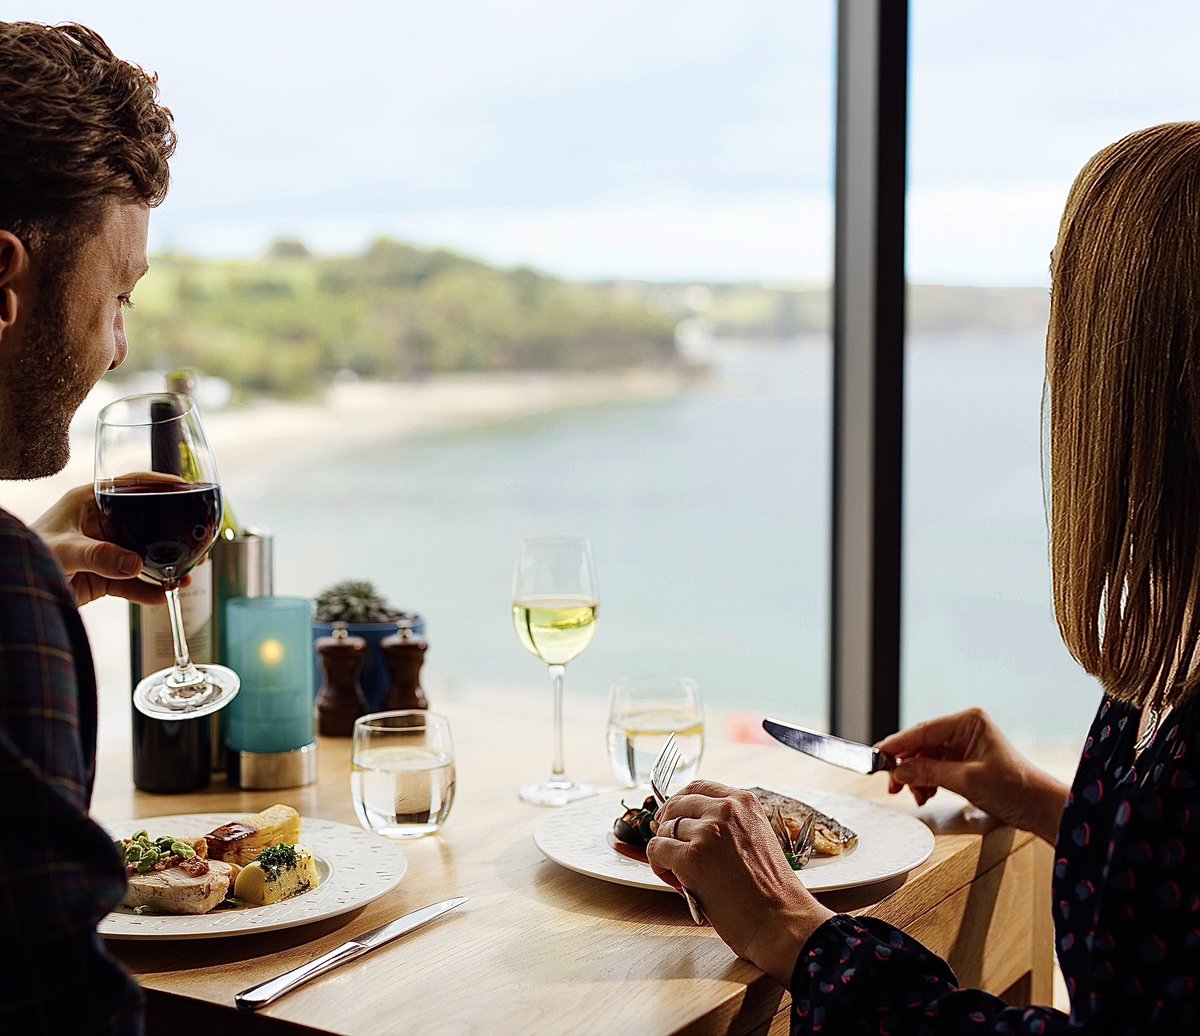 From our beautifully crafted dishes to our contemporary coastal setting, our Cliff Restaurant offers the perfect place to enjoy a special date night this Spring. Book a table at stbridesspahotel.com/dine